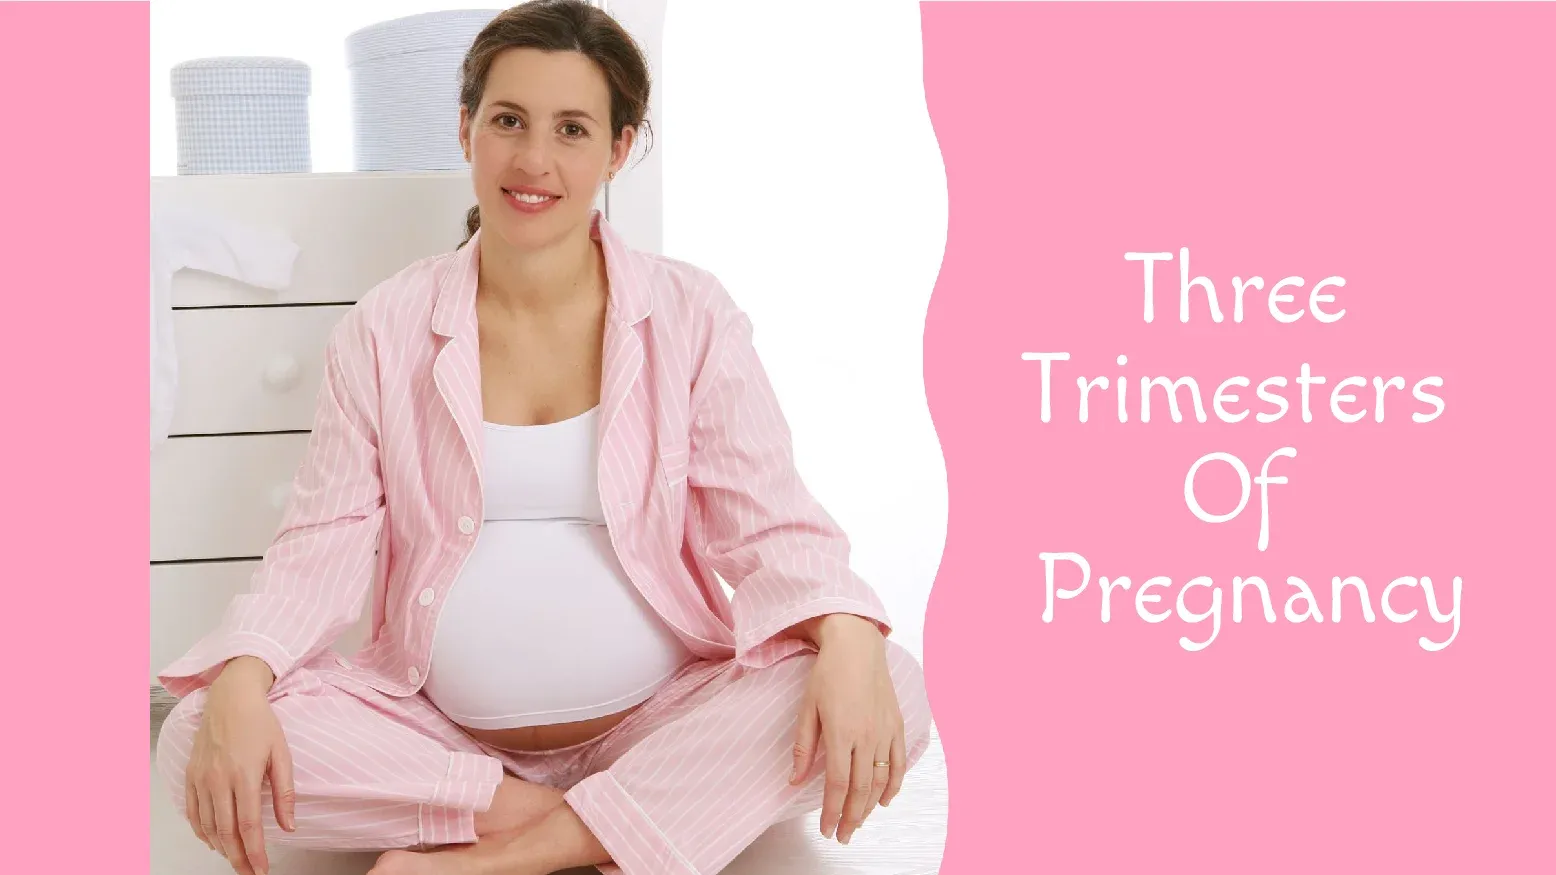 The Three Trimesters Of Pregnancy Know It All